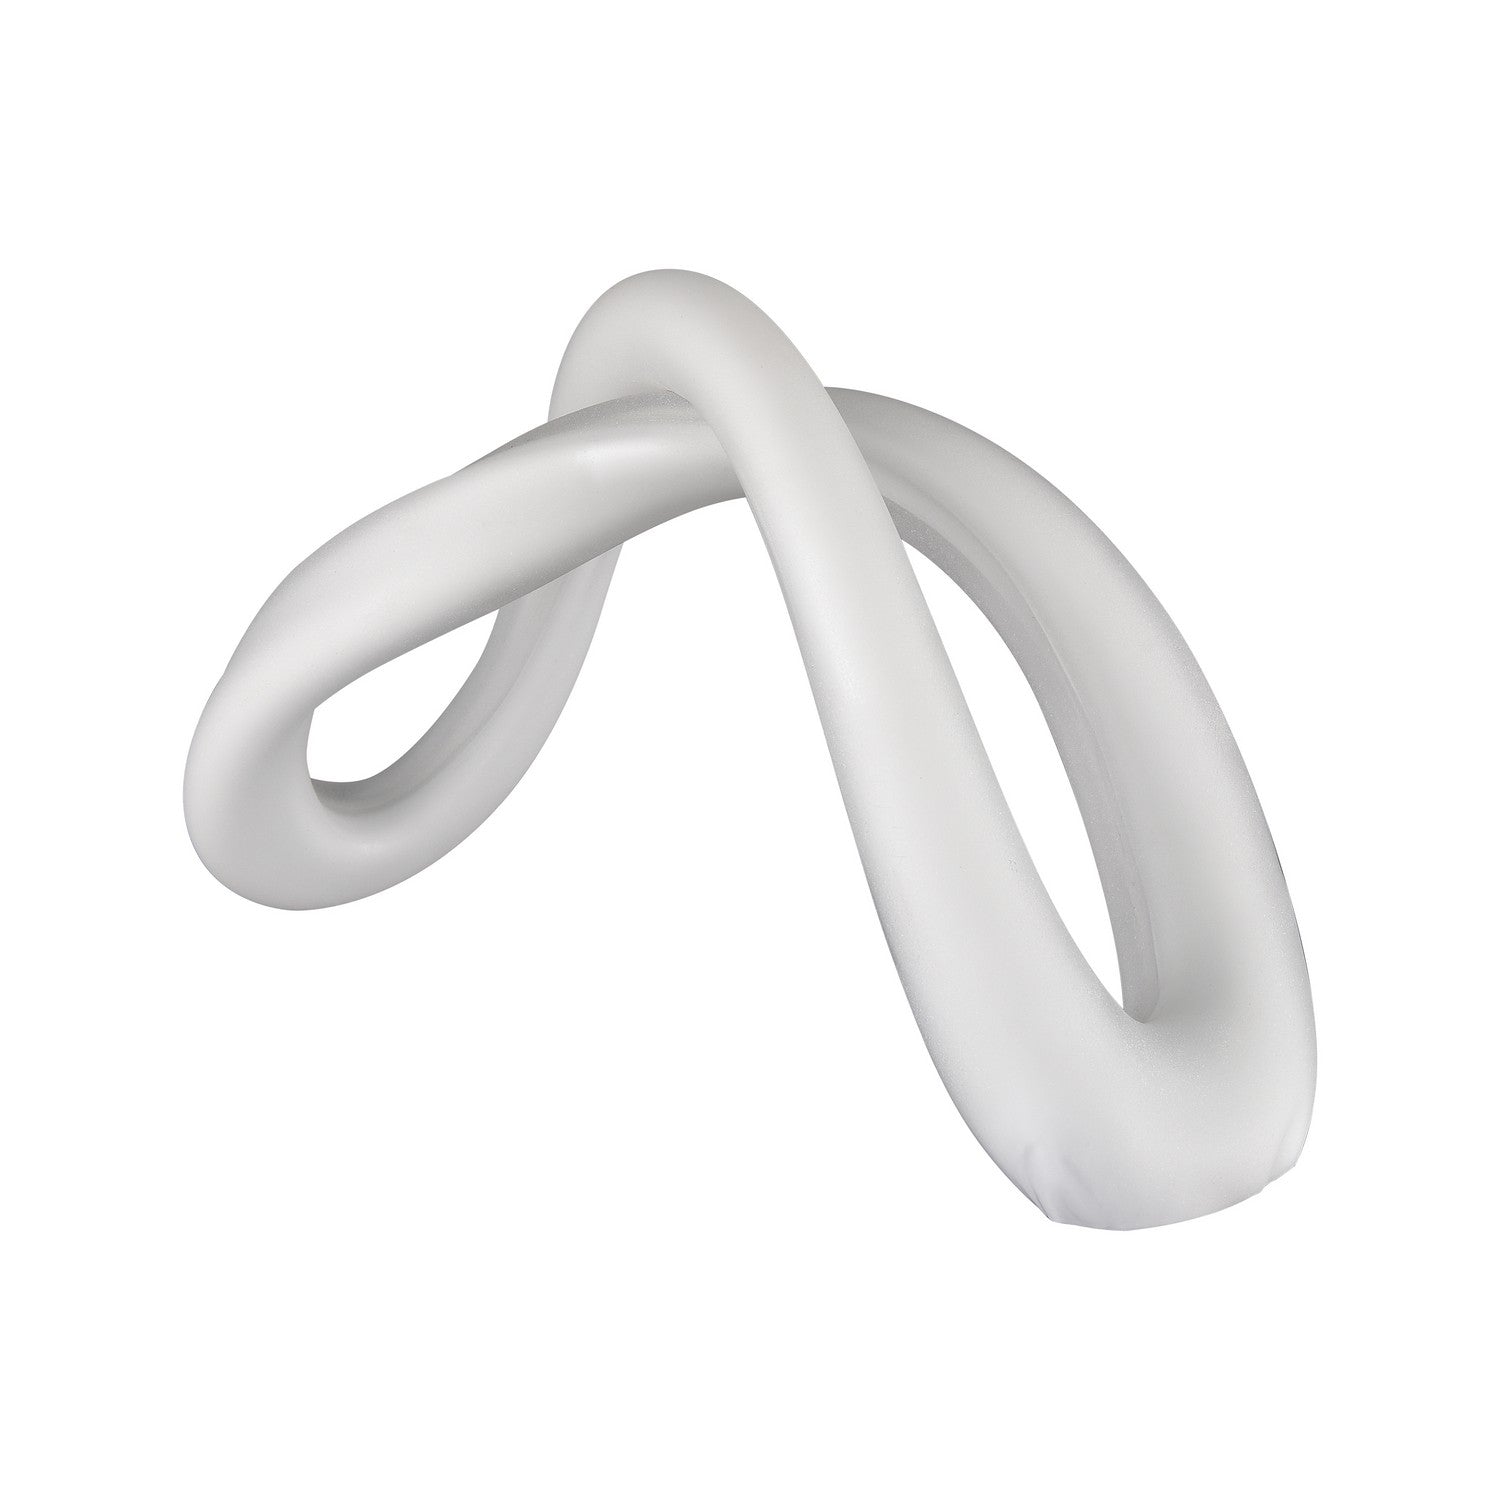 ELK Home - H0047-10984 - Decorative Object - Twisted - White